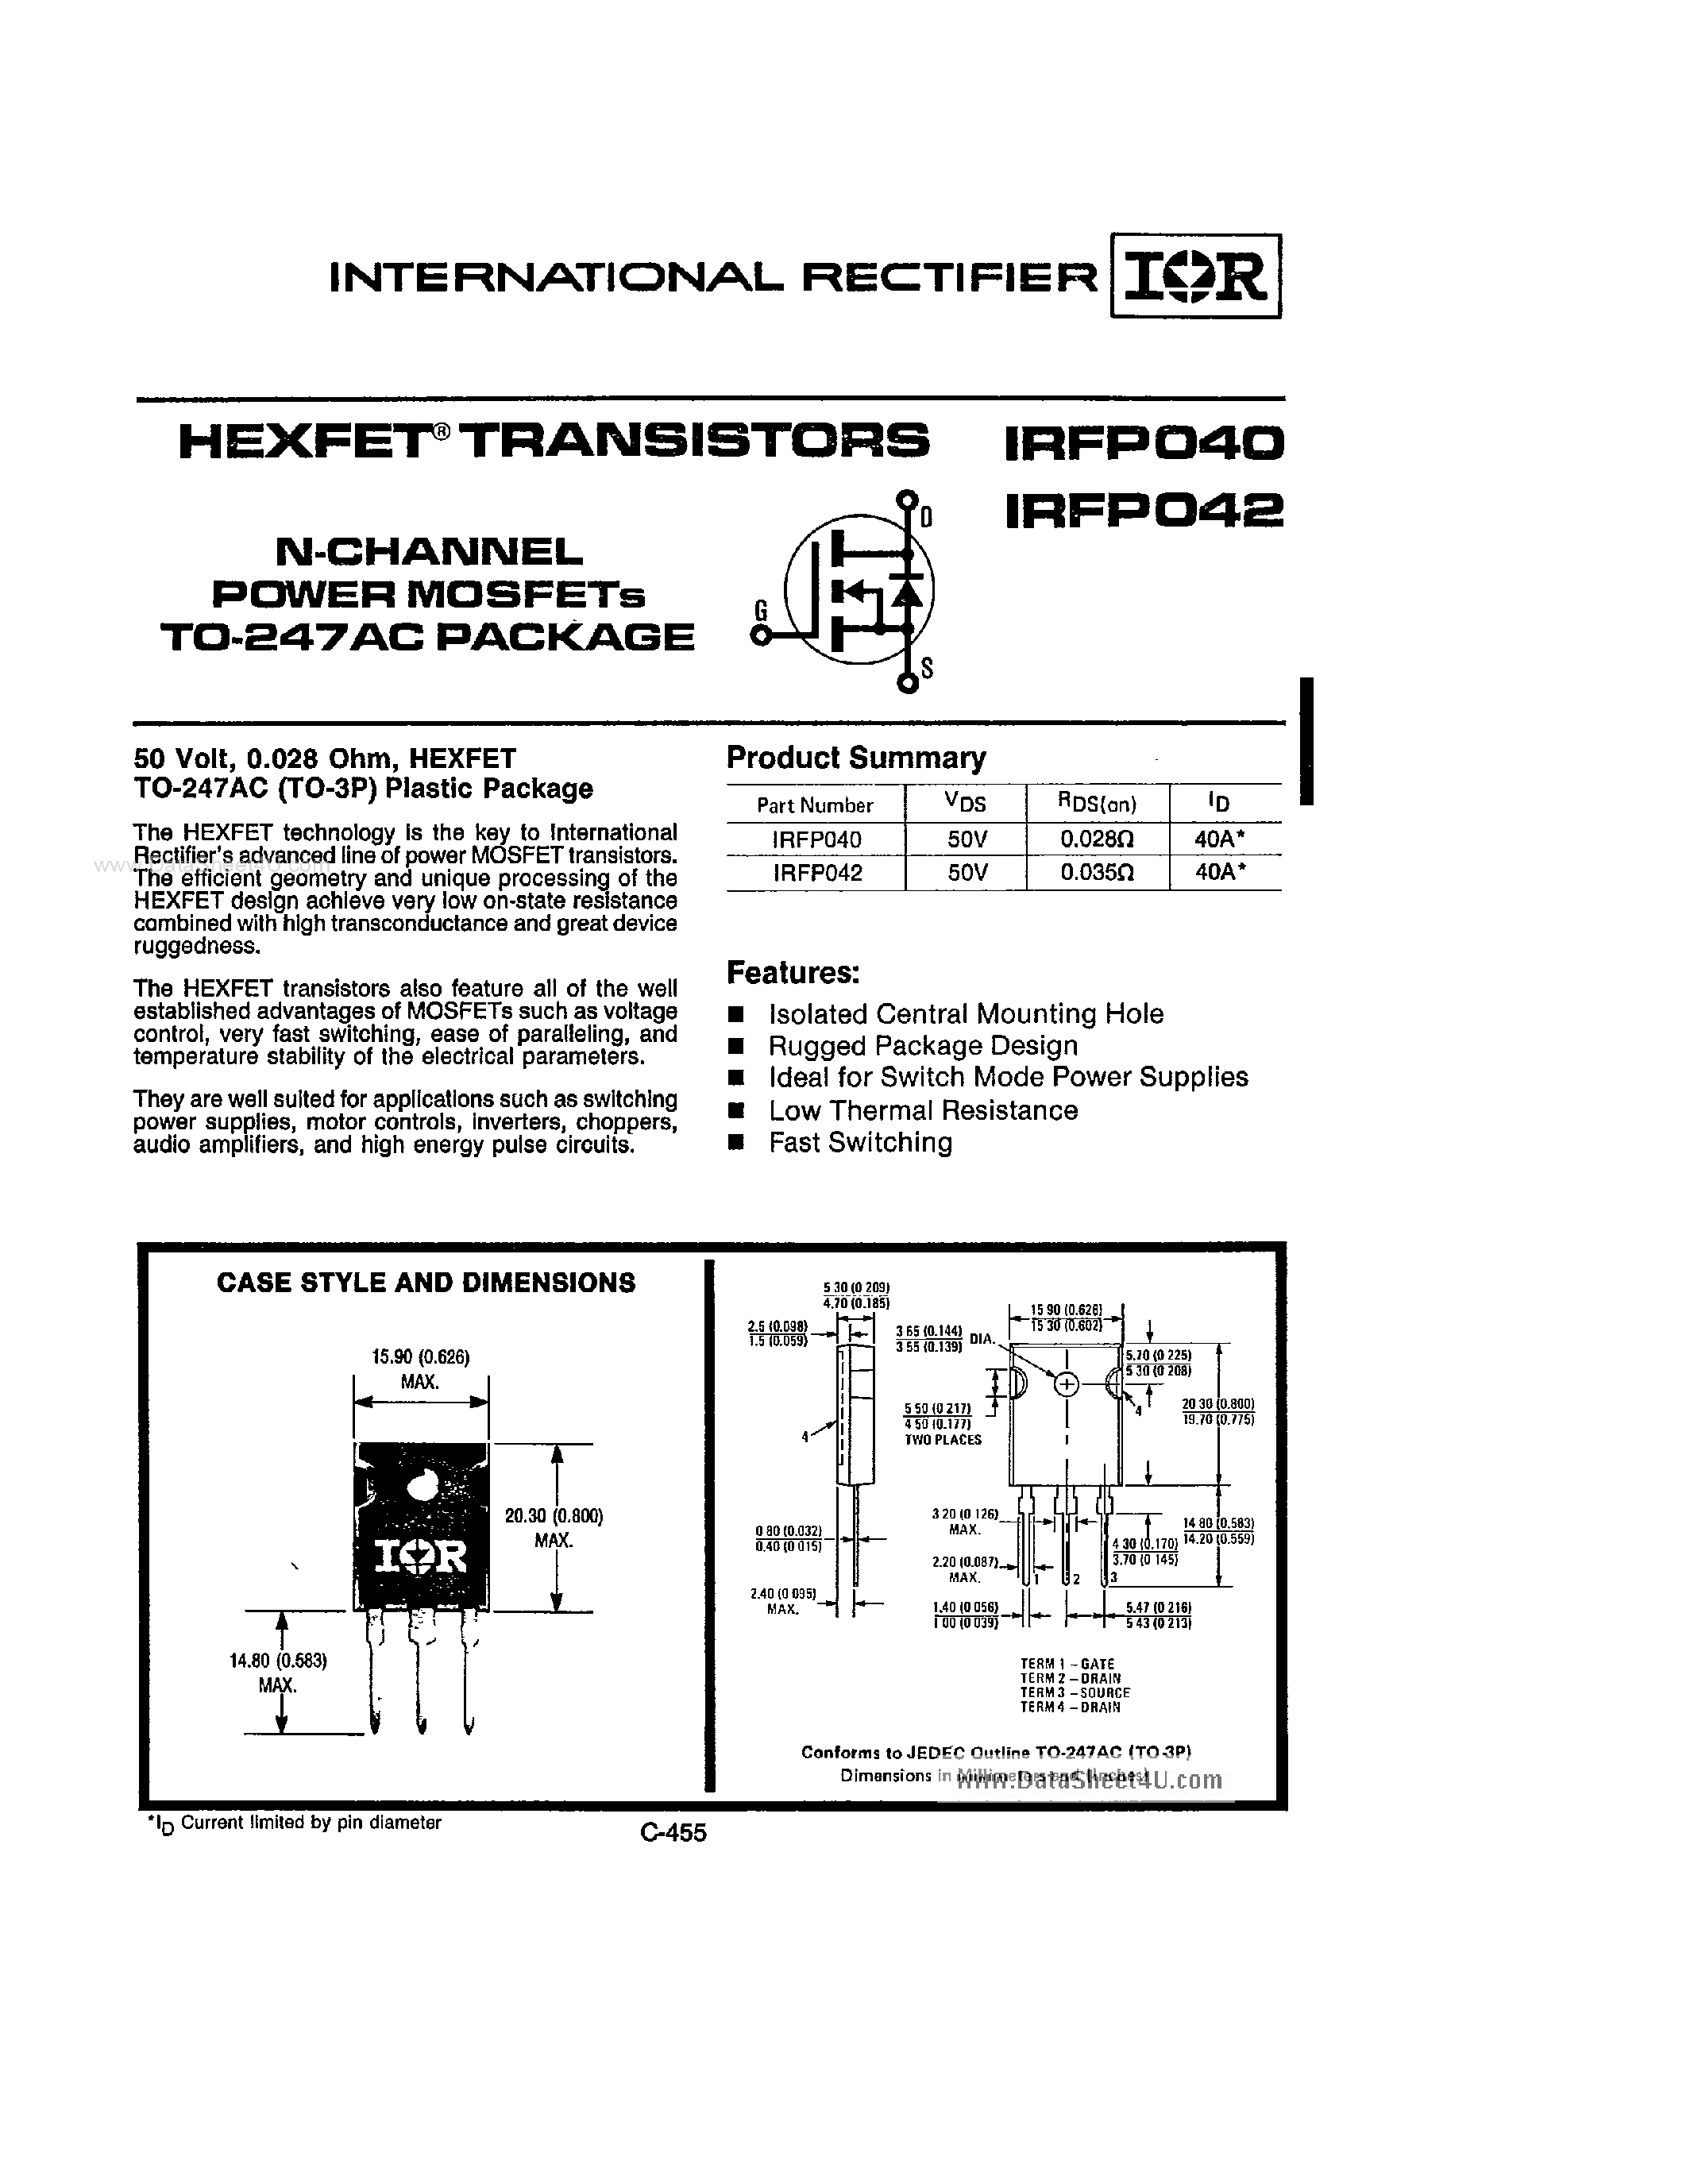 Datasheet IRFP040 - (IRFP040 / IRFP042) N-Channel Power MOSFET page 1